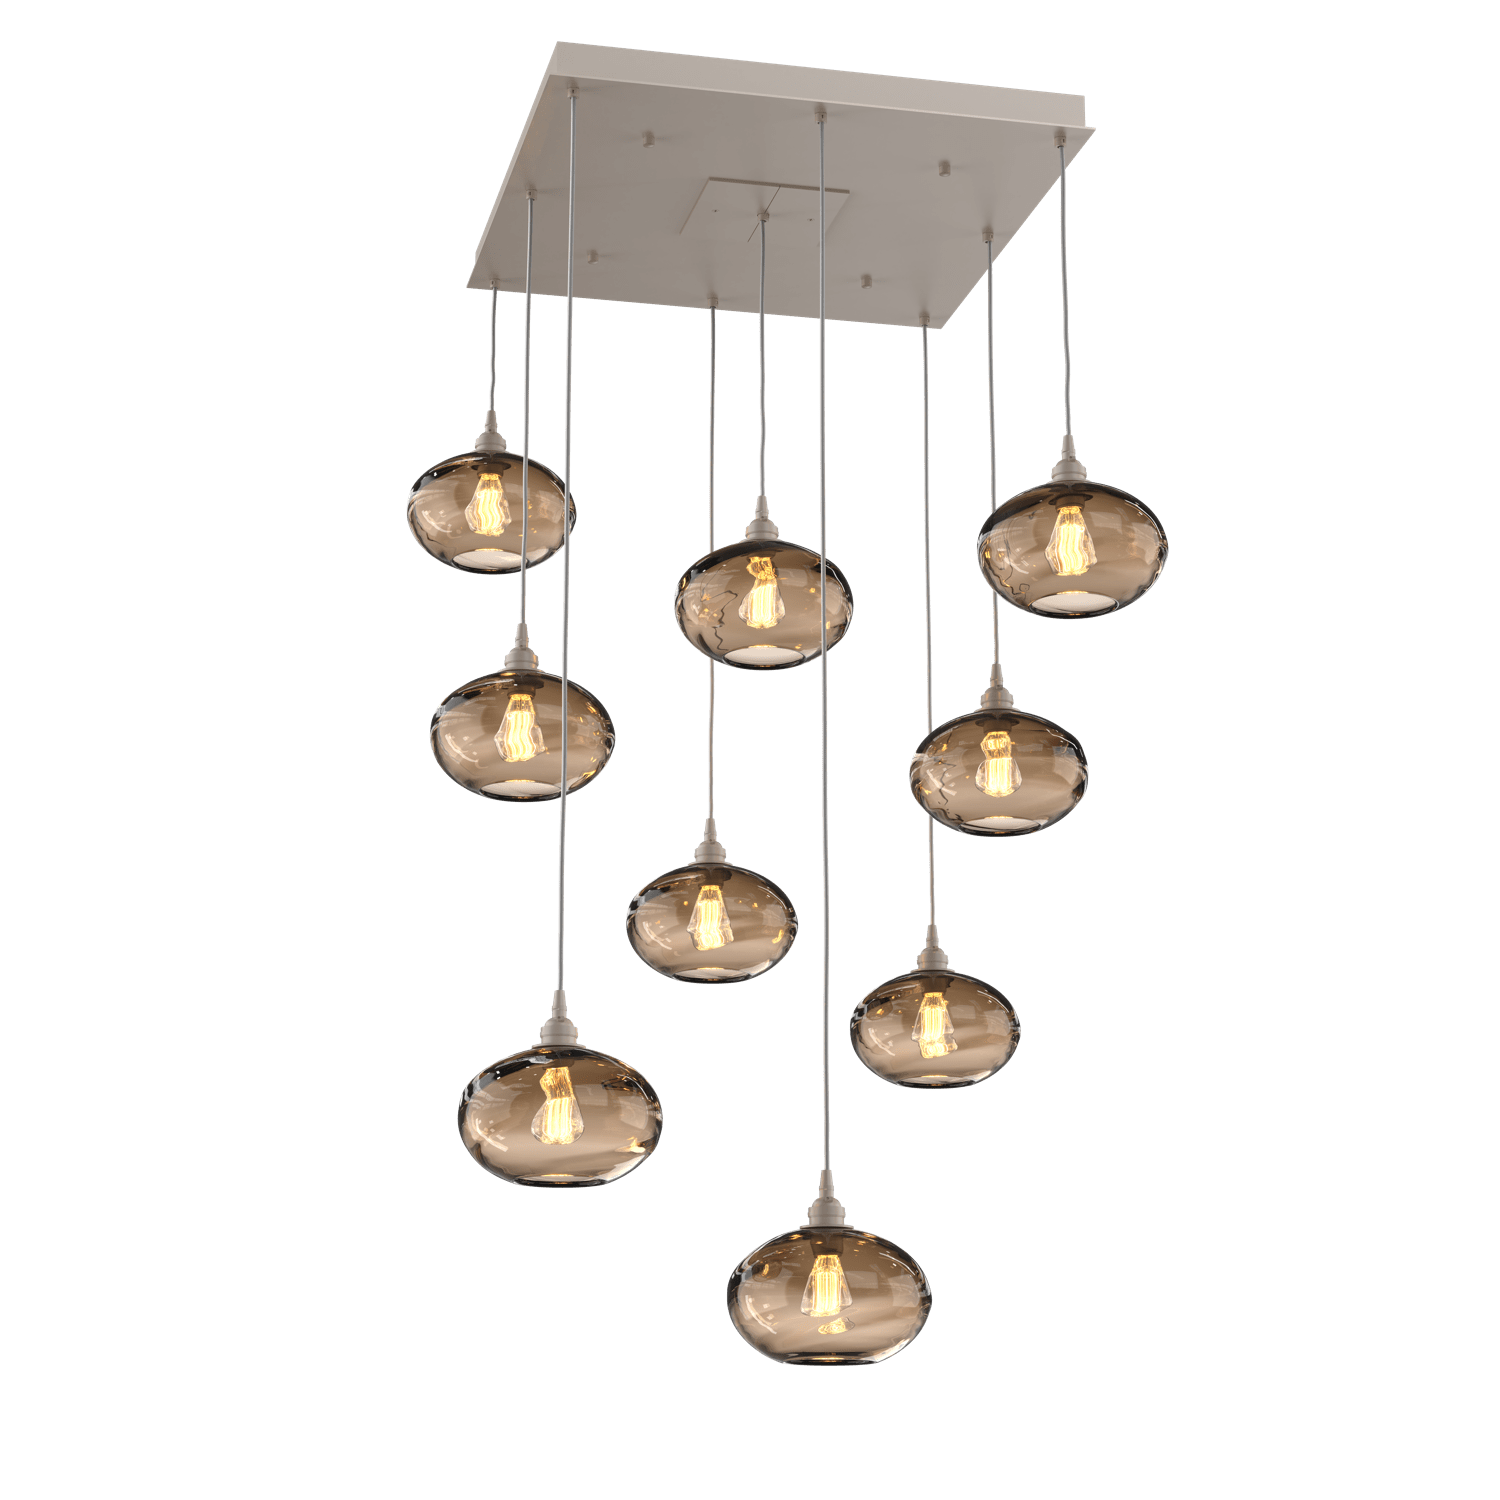 CHB0036-09-BS-OB-Hammerton-Studio-Optic-Blown-Glass-Coppa-9-light-square-pendant-chandelier-with-metallic-beige-silver-finish-and-optic-bronze-blown-glass-shades-and-incandescent-lamping